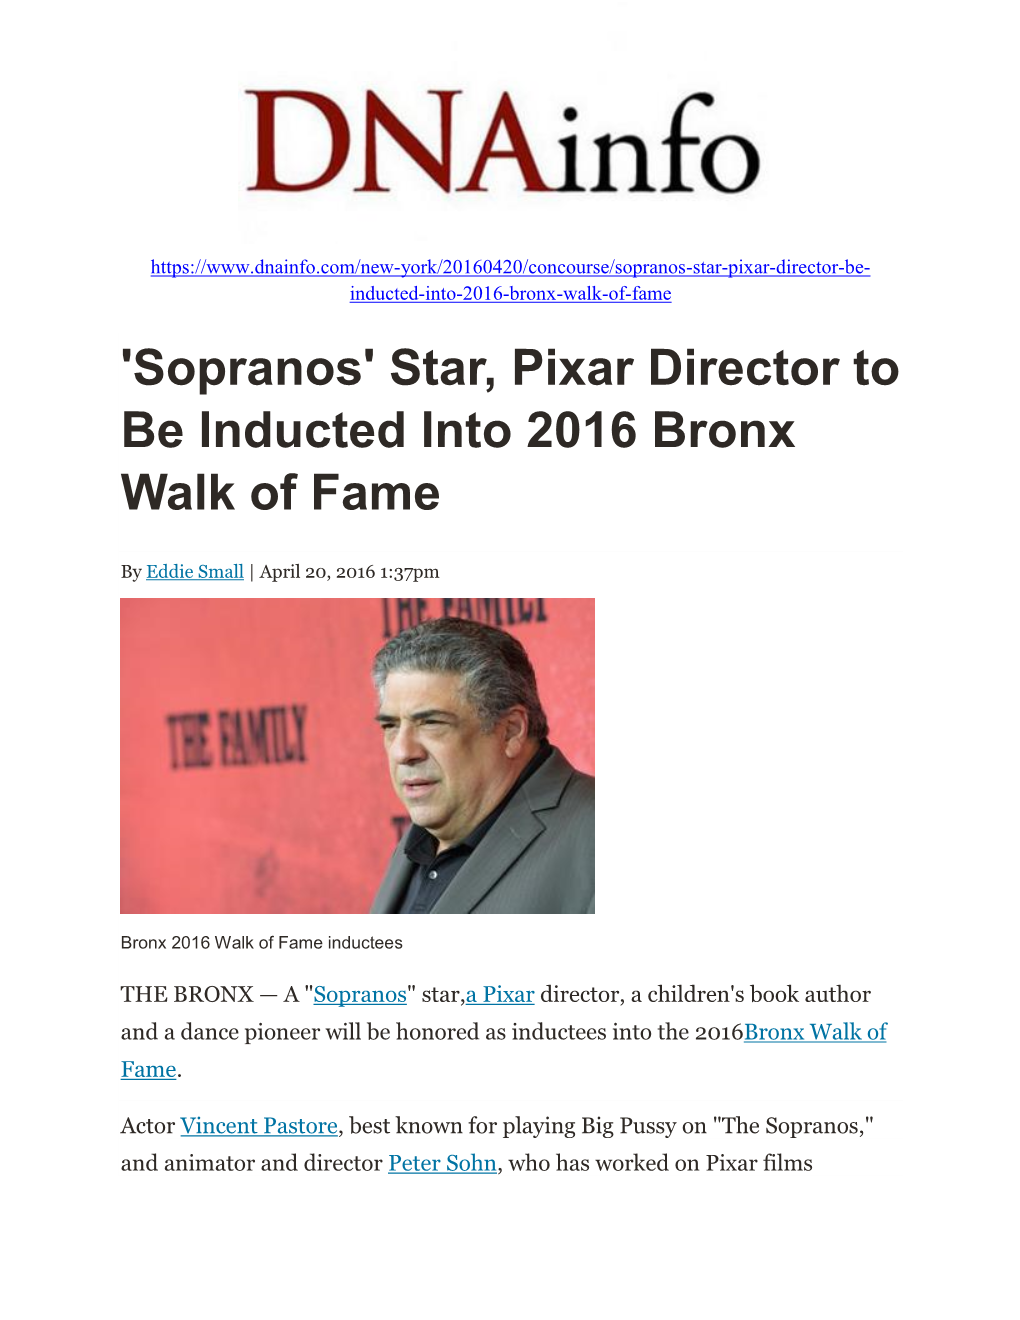 'Sopranos' Star, Pixar Director to Be Inducted Into 2016 Bronx Walk of Fame